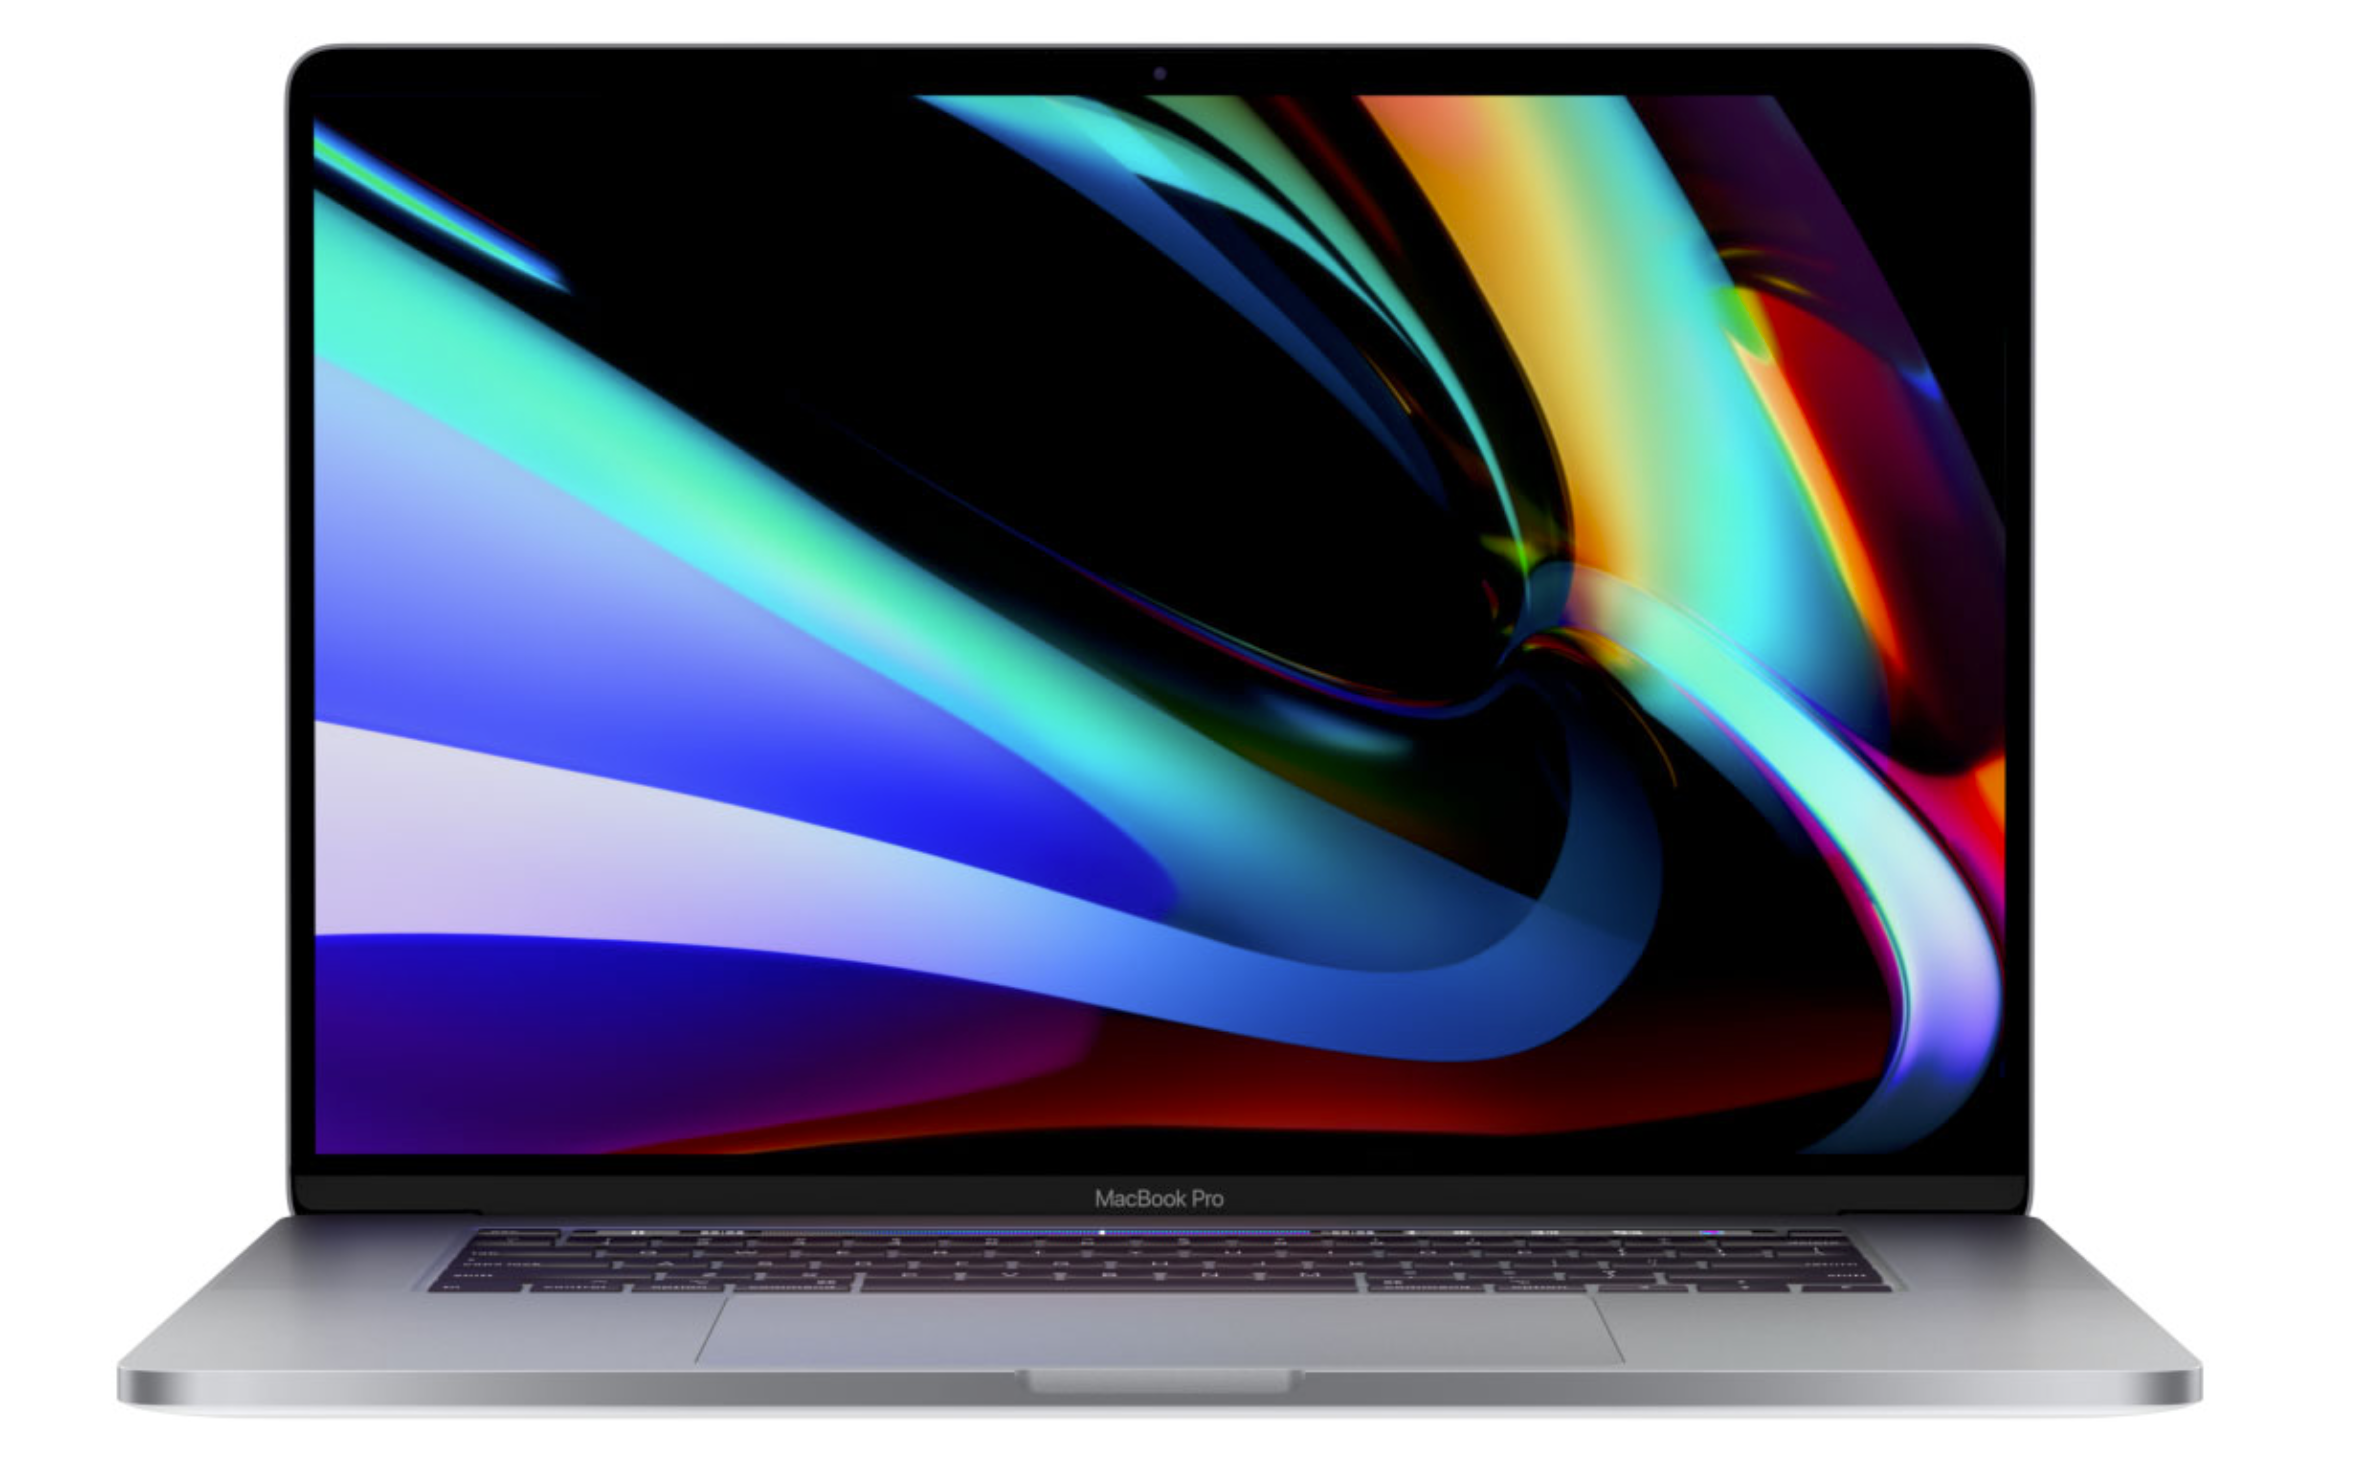 Apple Macbook Pro 16 19 Laptop Review A Convincing Core I9 90h And Radeon Pro 5500m Powered Multimedia Laptop Notebookcheck Net Reviews